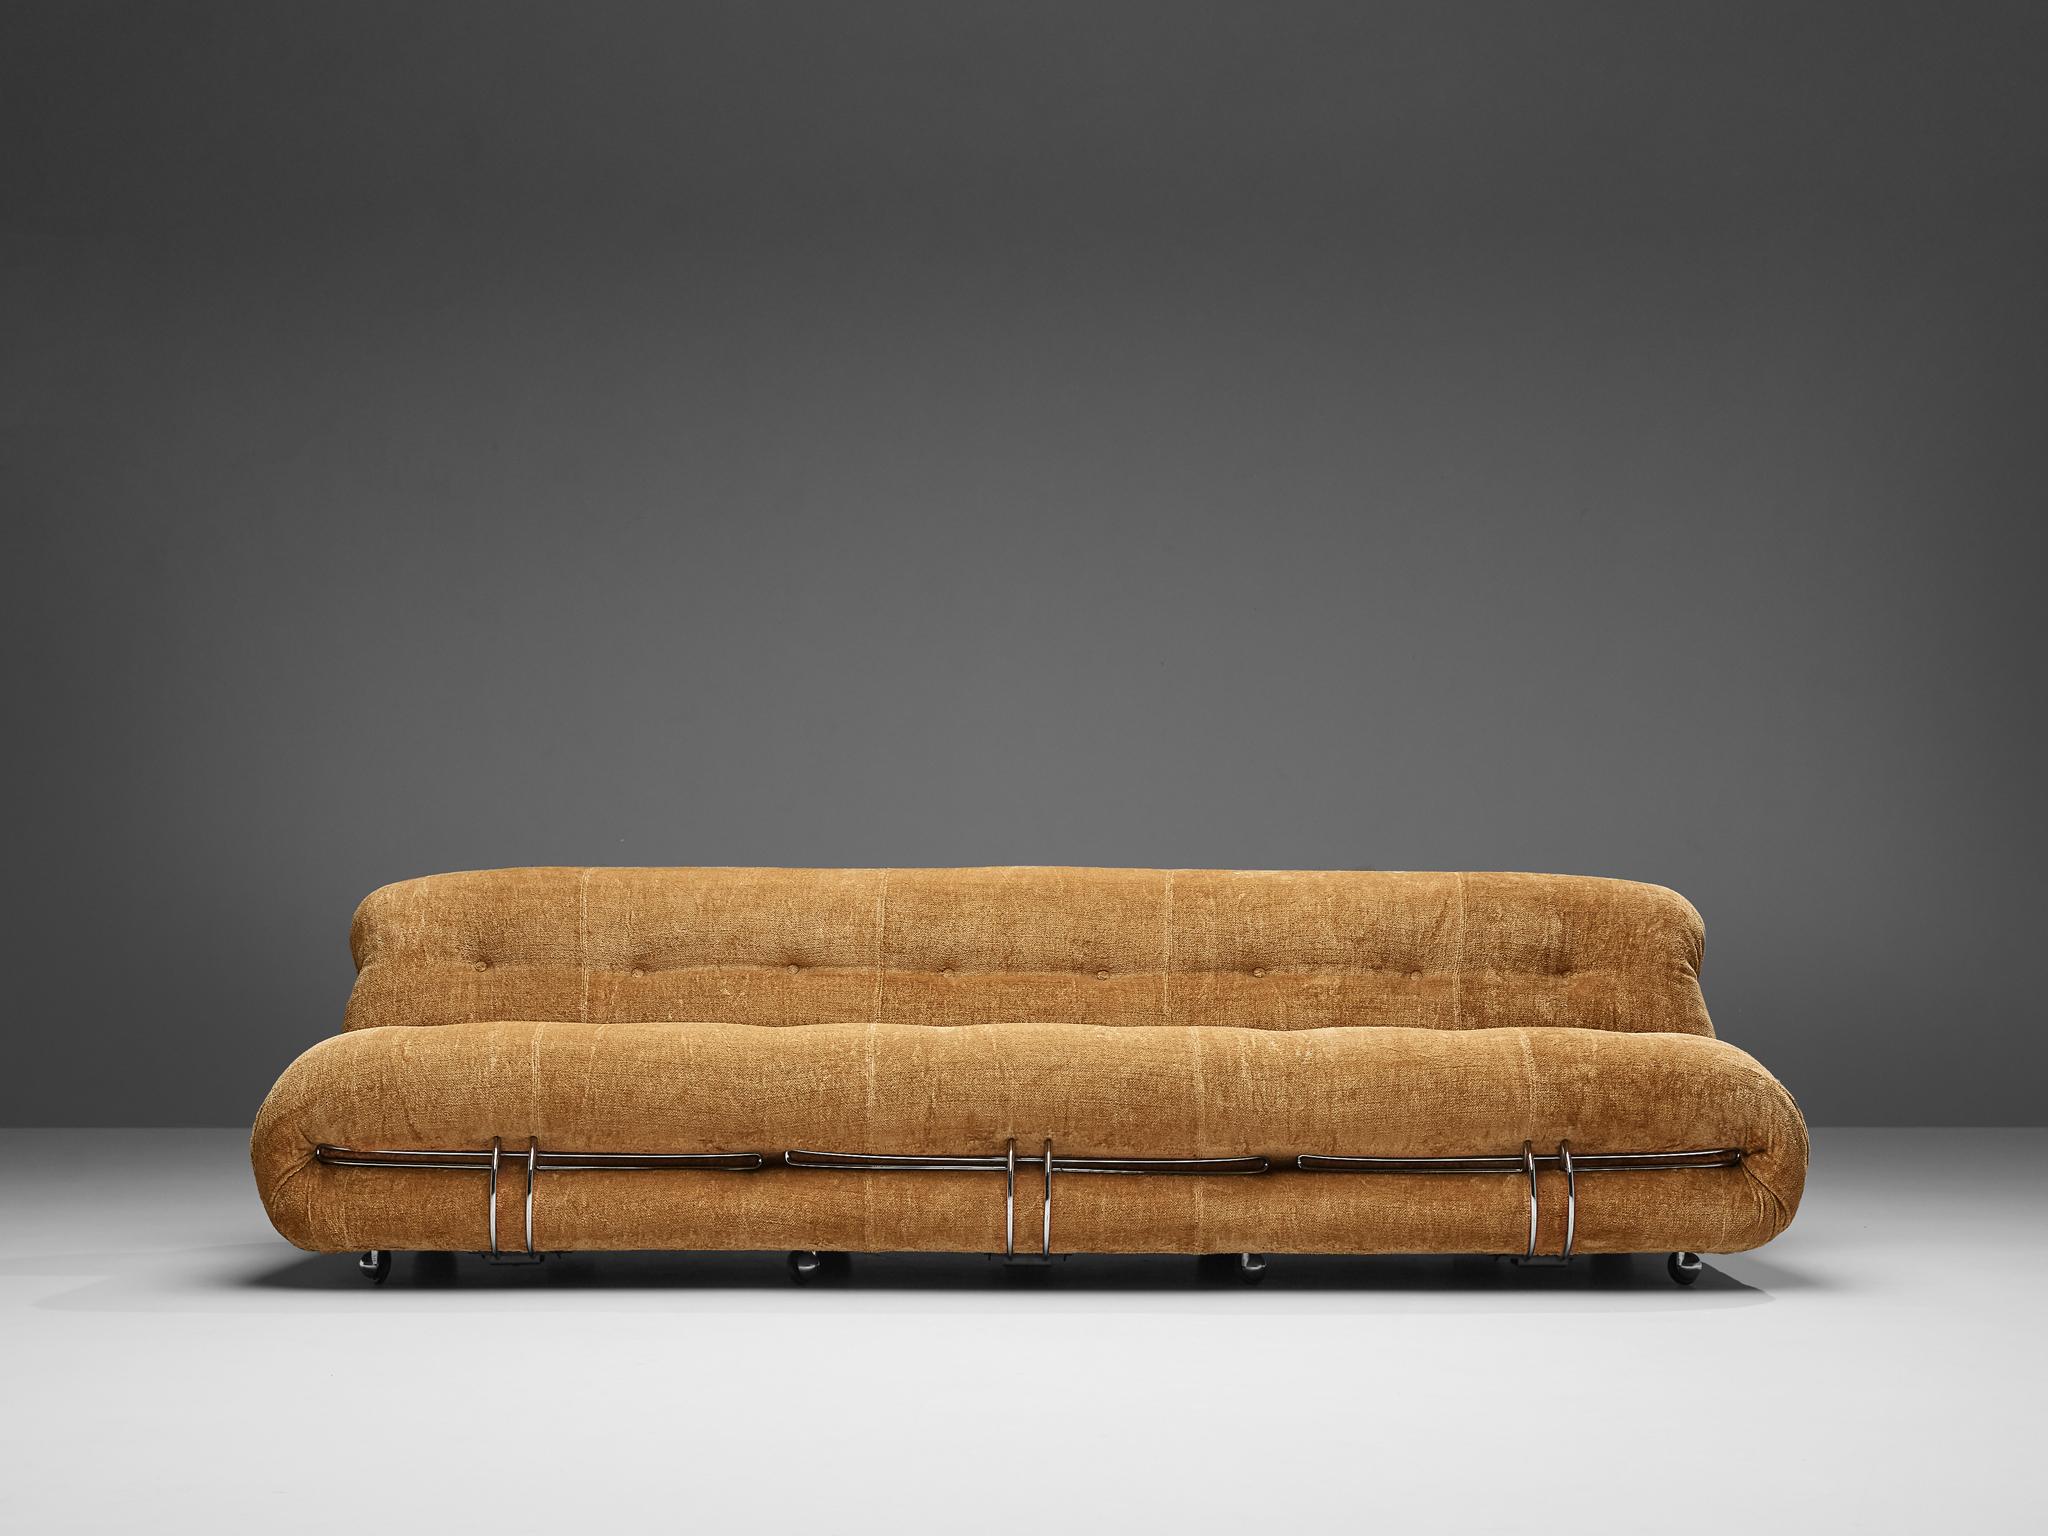 Afra & Tobia Scarpa for Cassina, 'Soriana' sofa, velour and metal, Italy, 1969. 

Iconic sofa by Italian designer couple Afra & Tobia Scarpa, the Soriana proposes a model that institutionalizes the image of the informal sitting where everything has